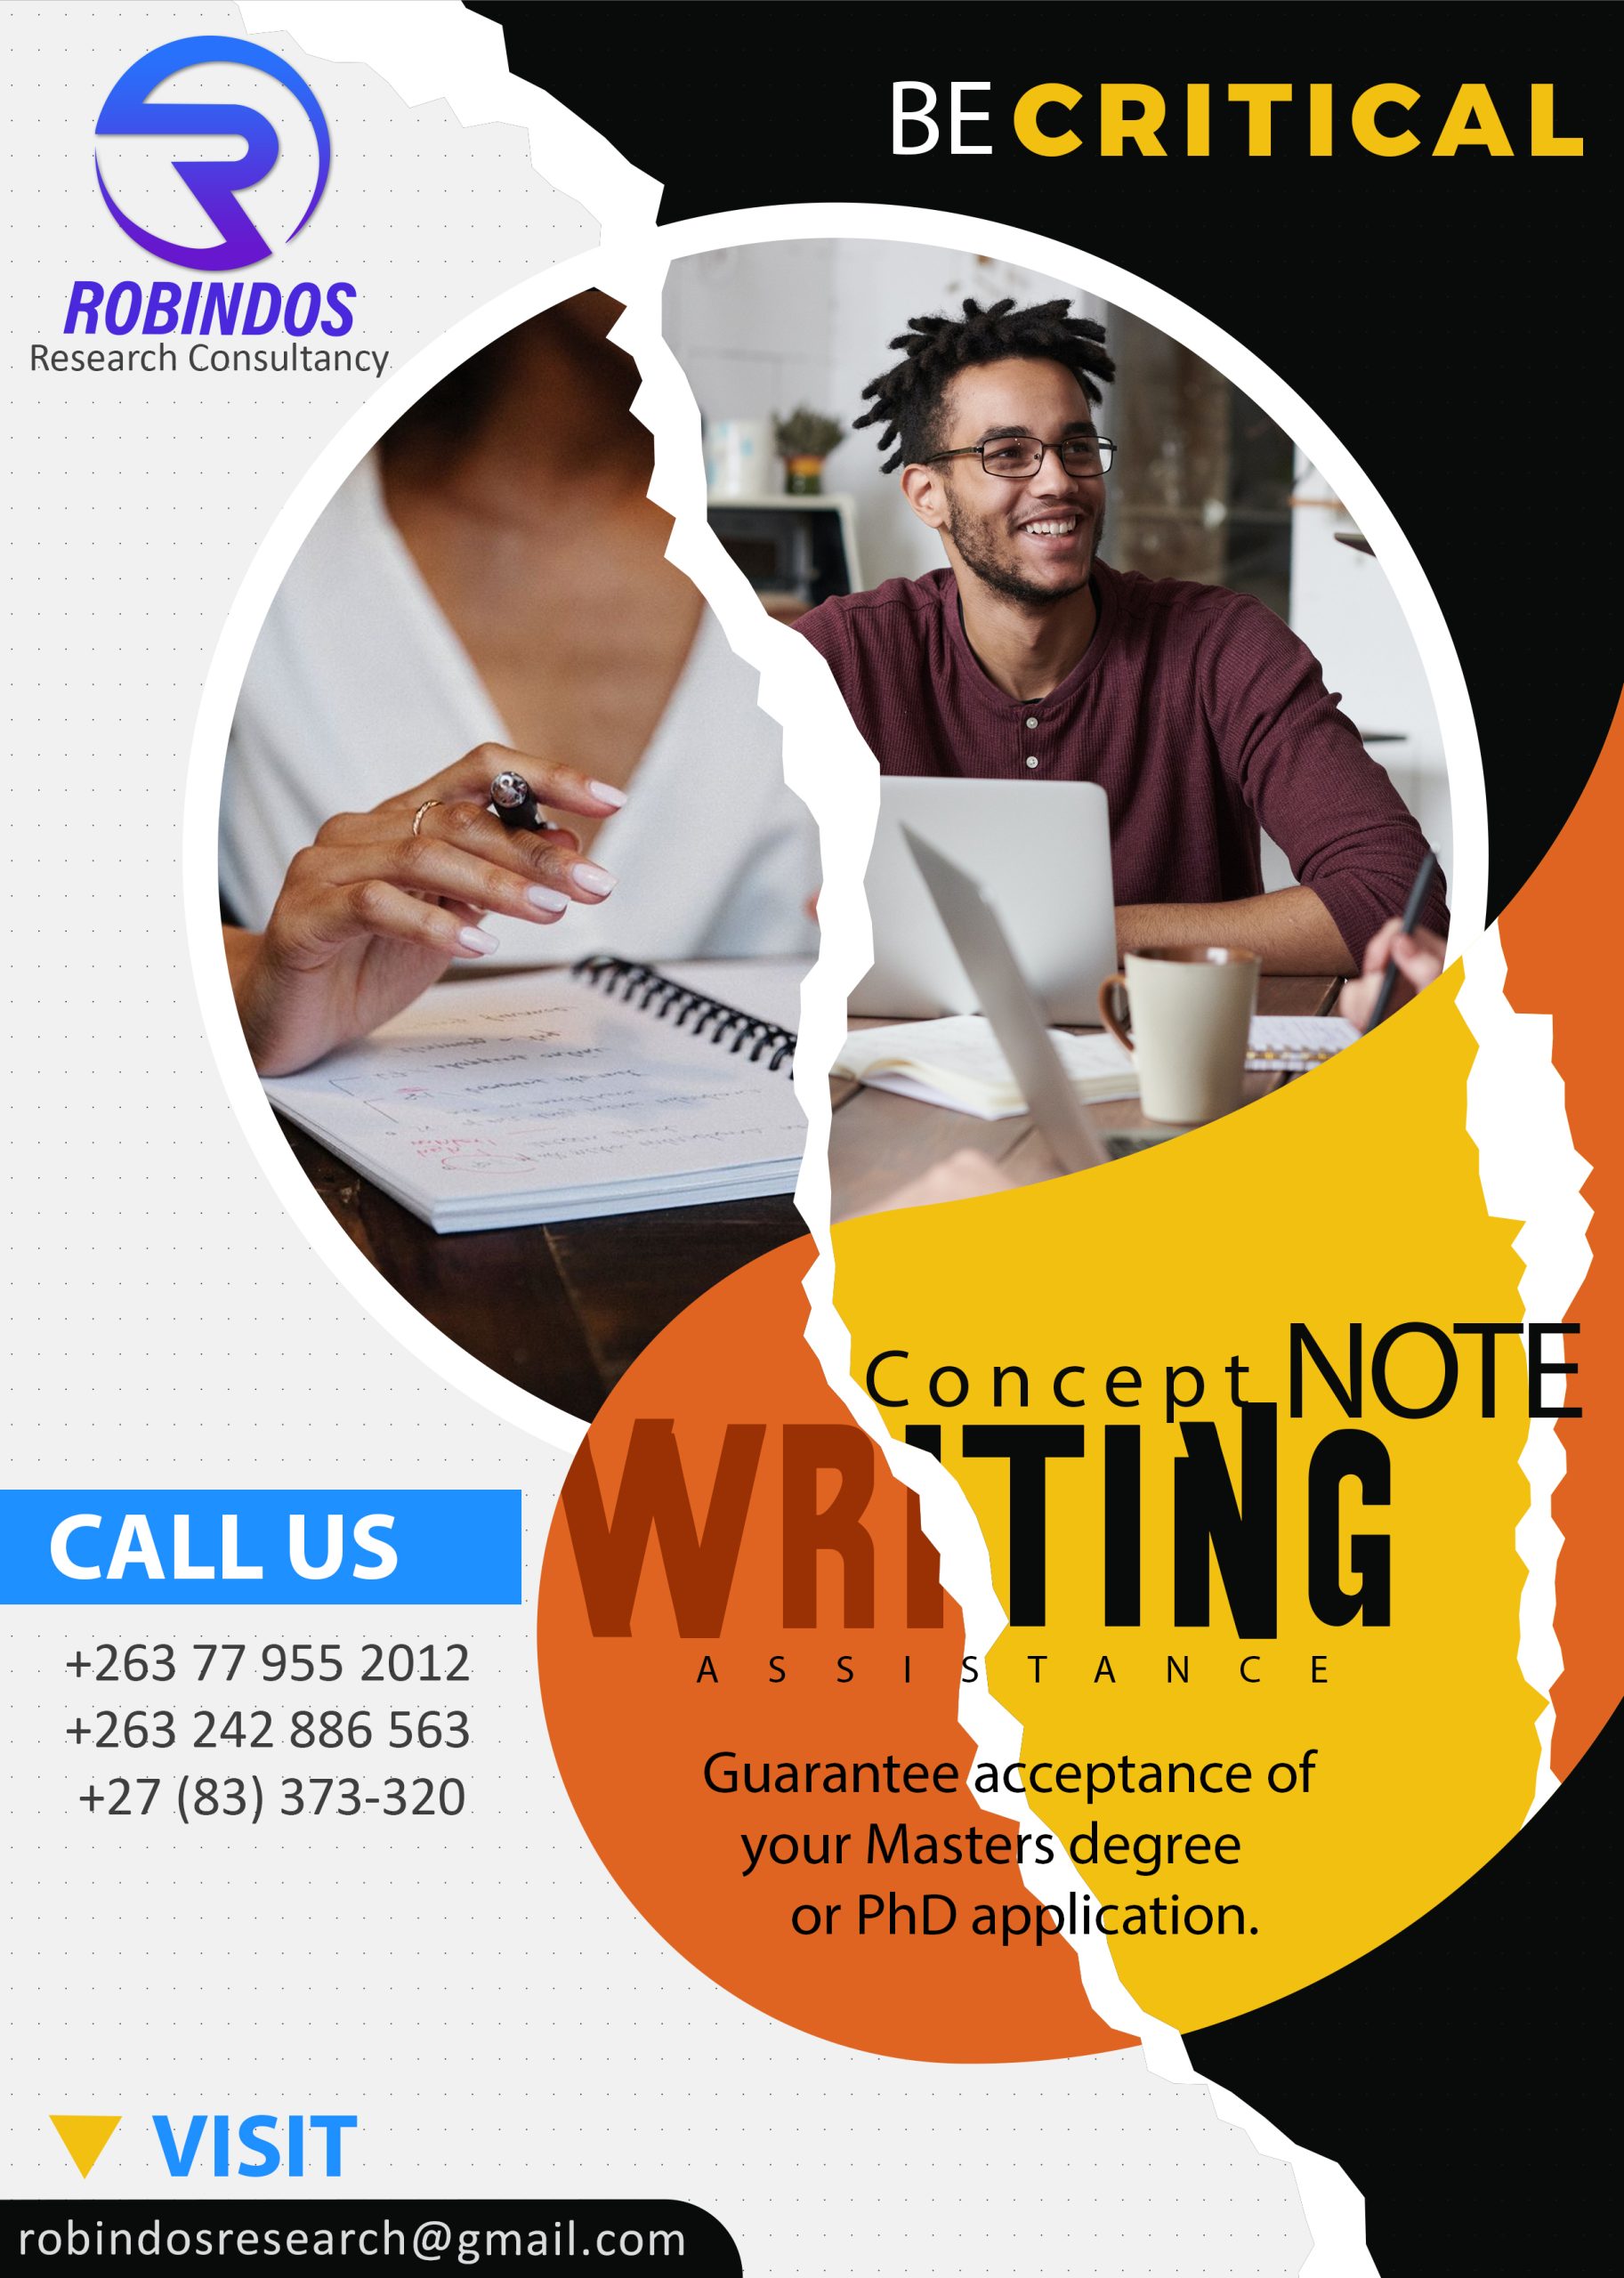 robindos research consultancy concept note writing 1